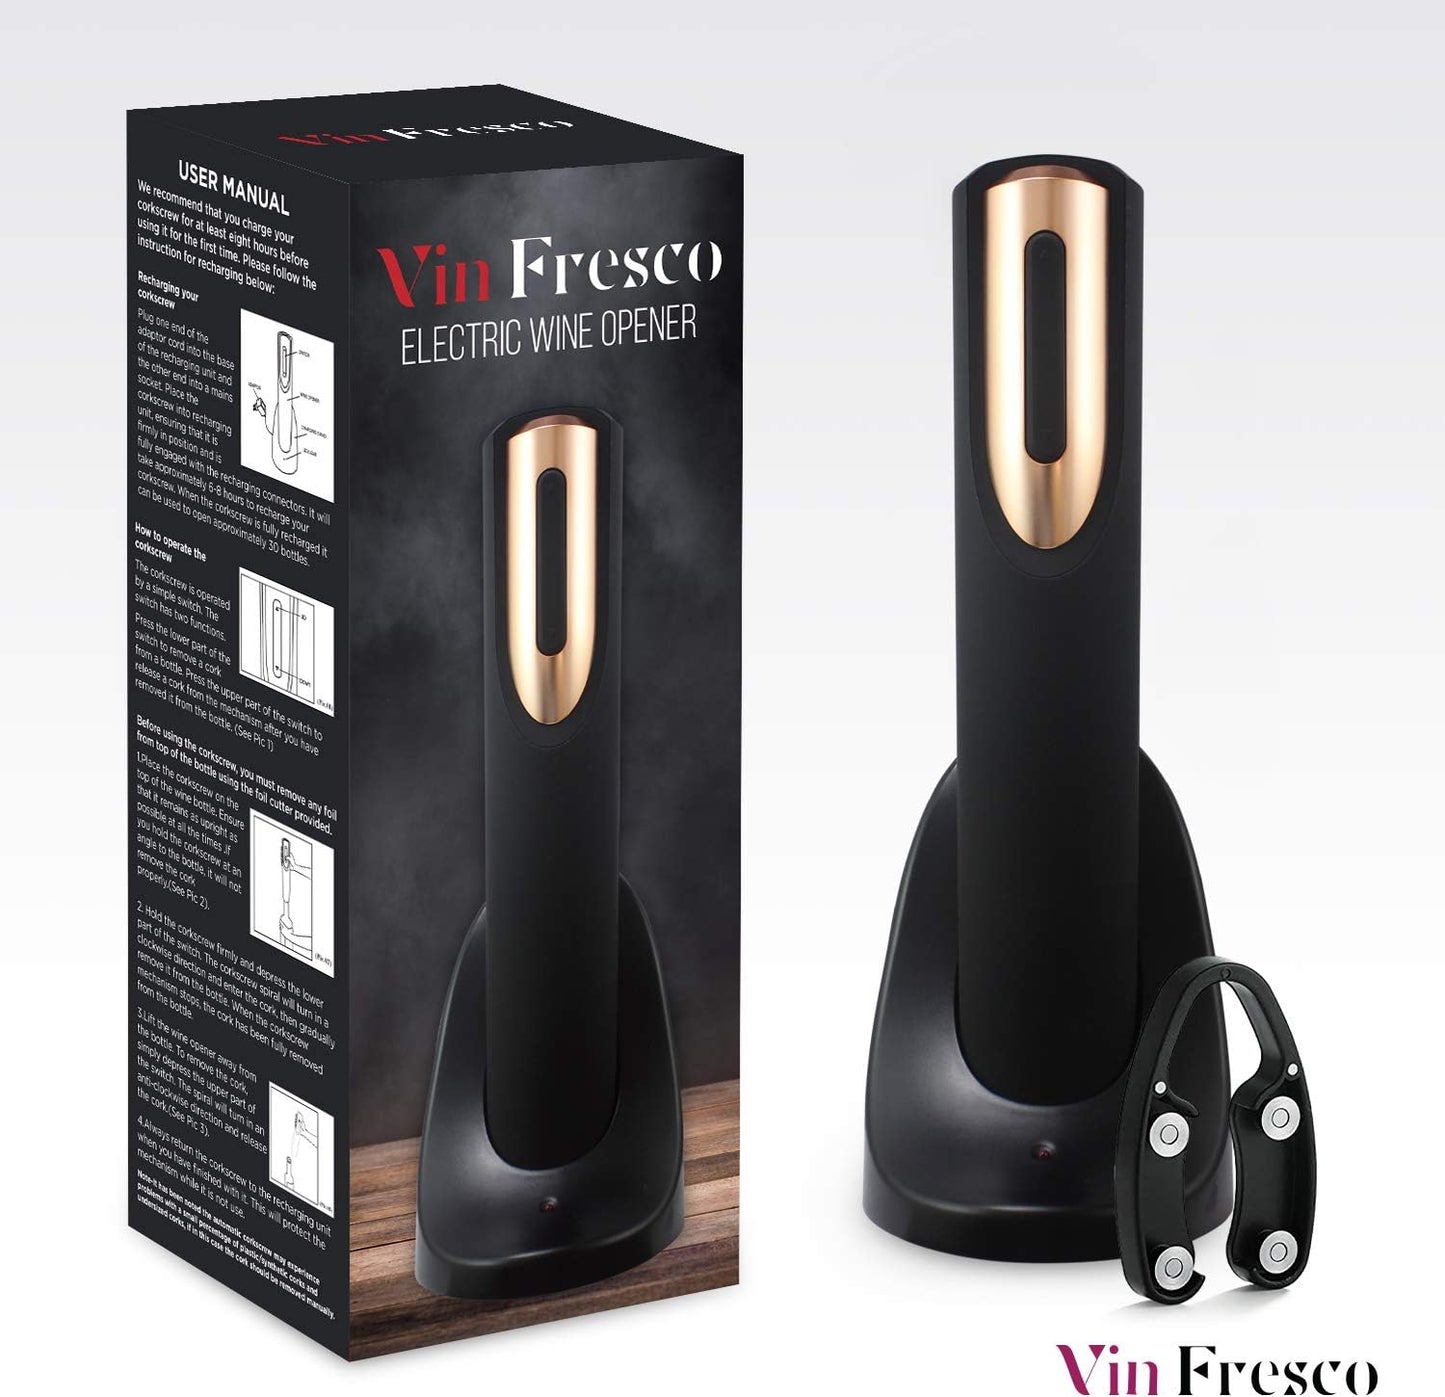 Rechargeable Electric Wine Bottle Opener with Charging Base & Foil Cutter